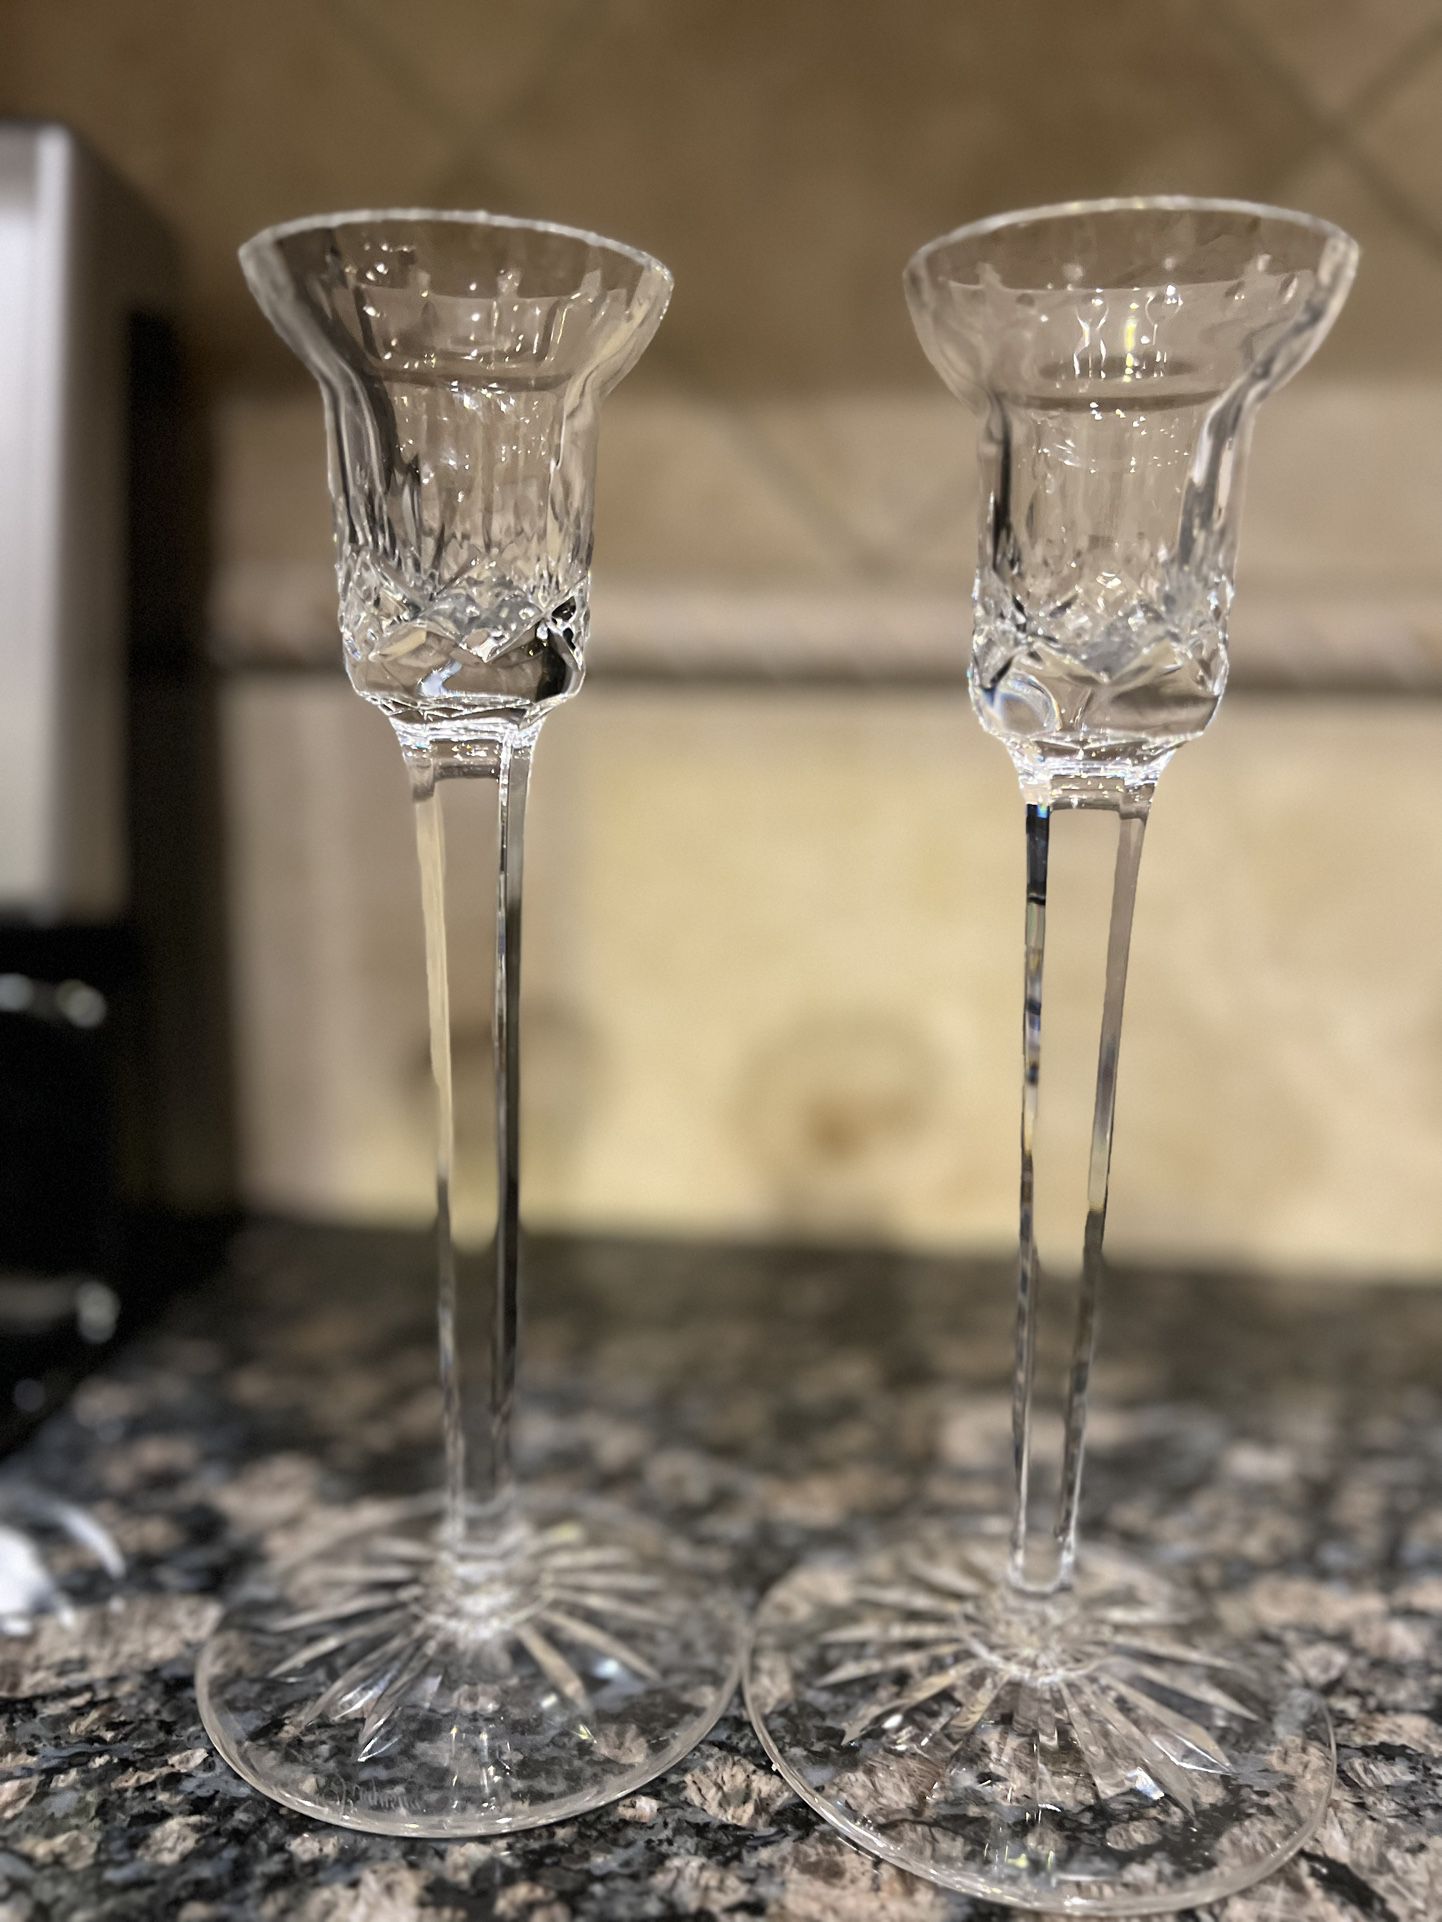 2 Waterford Crystal Candleholders..8 Inches Each